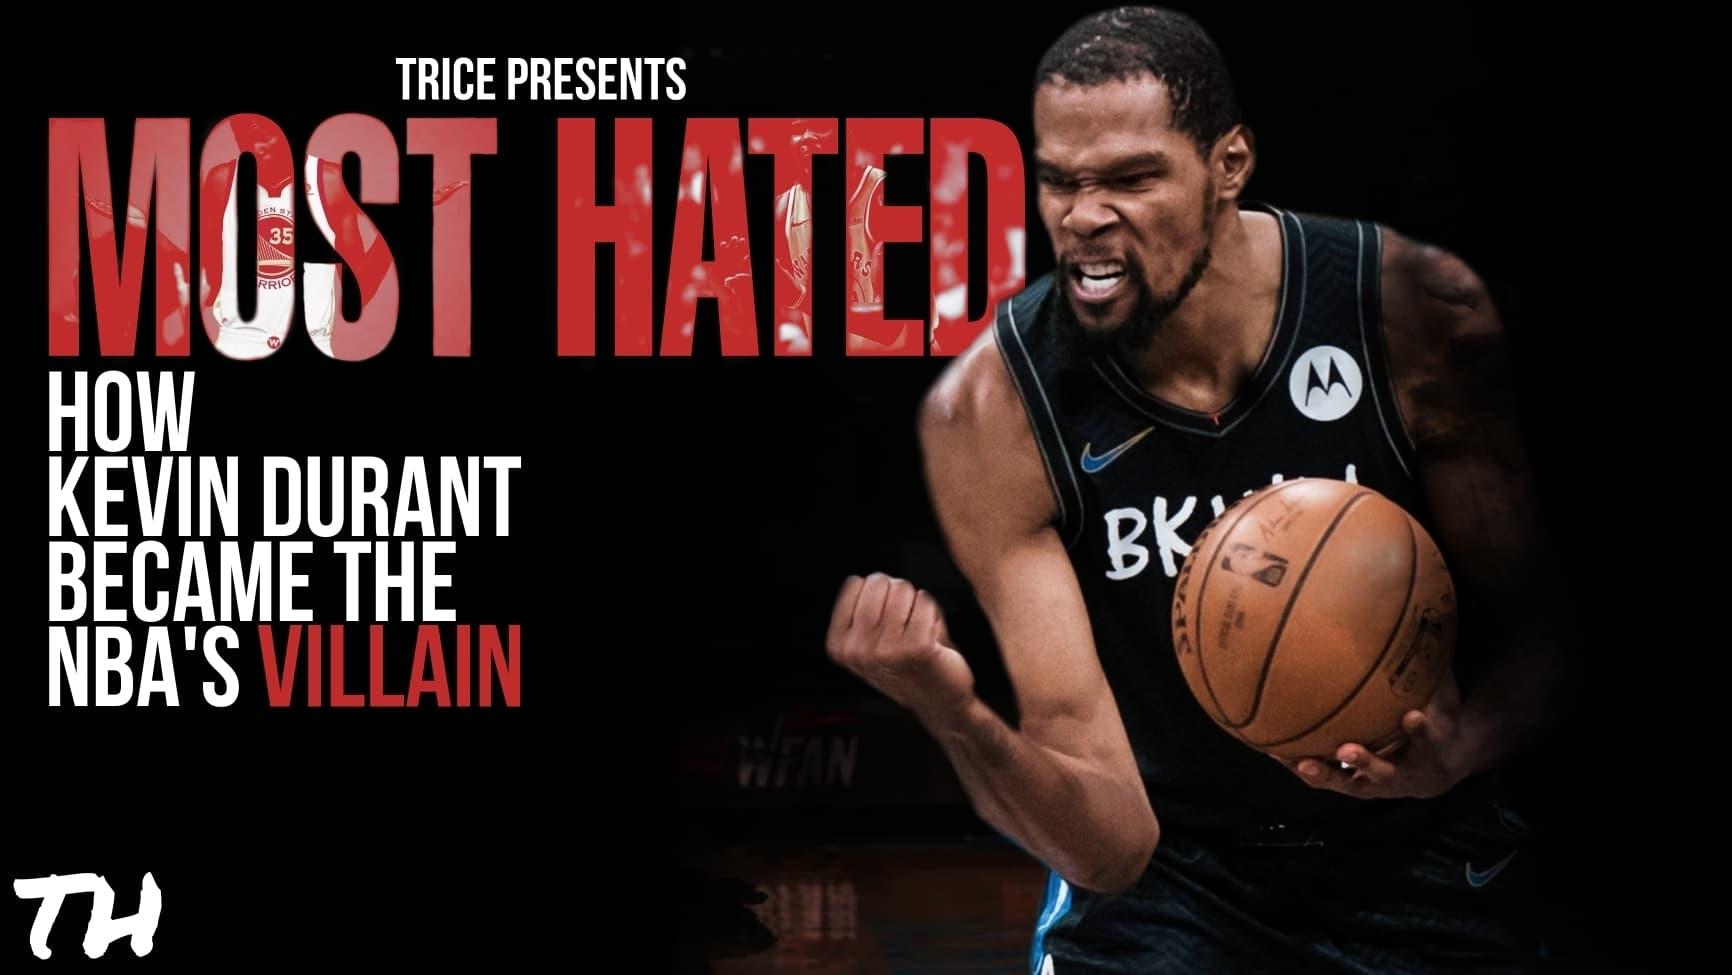 Most Hated: How Kevin Durant Became the NBA’s Villain backdrop